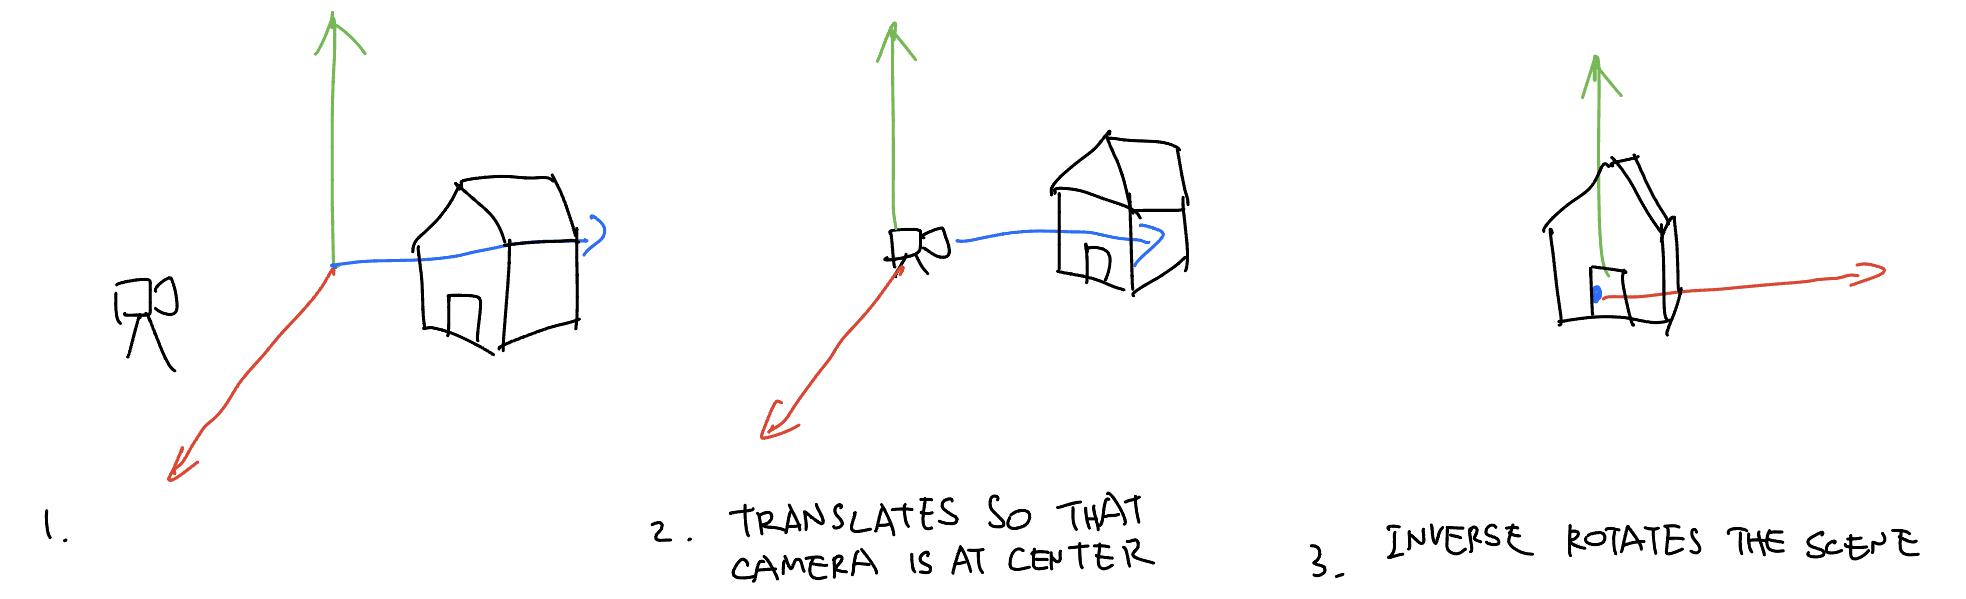 An illustration of how lookAt works. First, the scene is translated to a space where the camera is stationed at the center. Then, the scene is rotated to canonnical camera space.